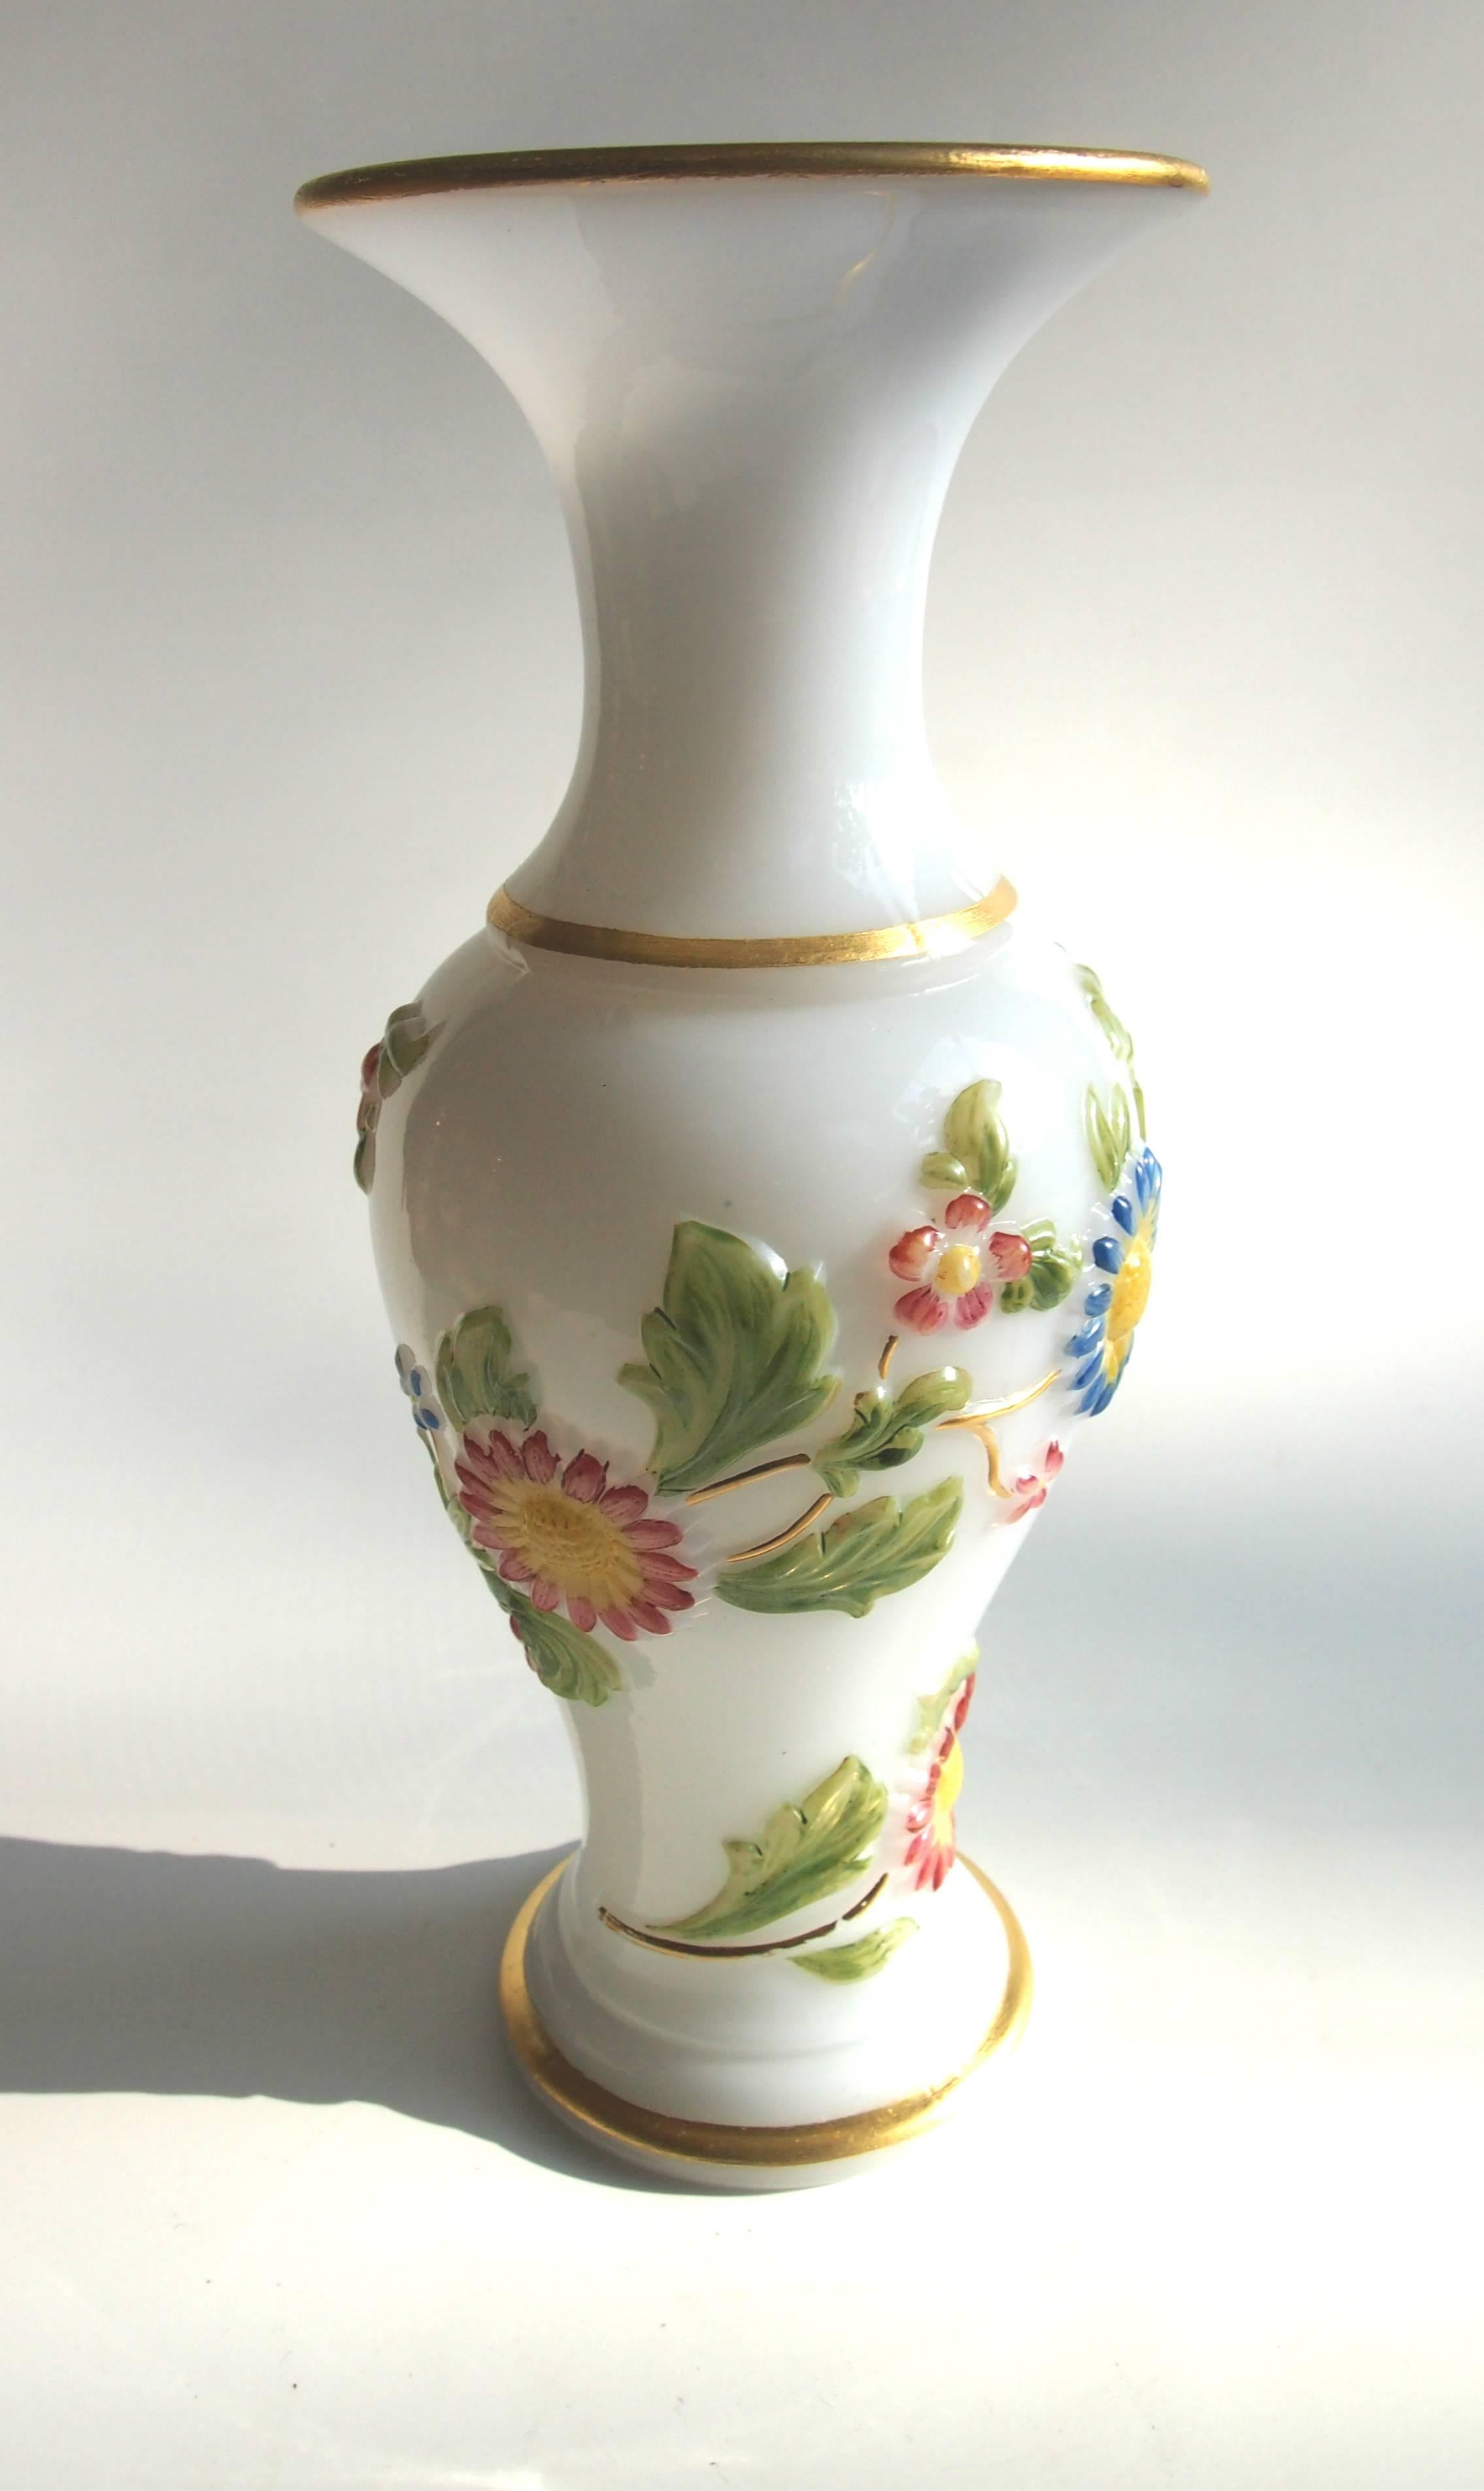 French Baccarat 19th Century Polychrome Enamel Mould Pressed Daisy Vase